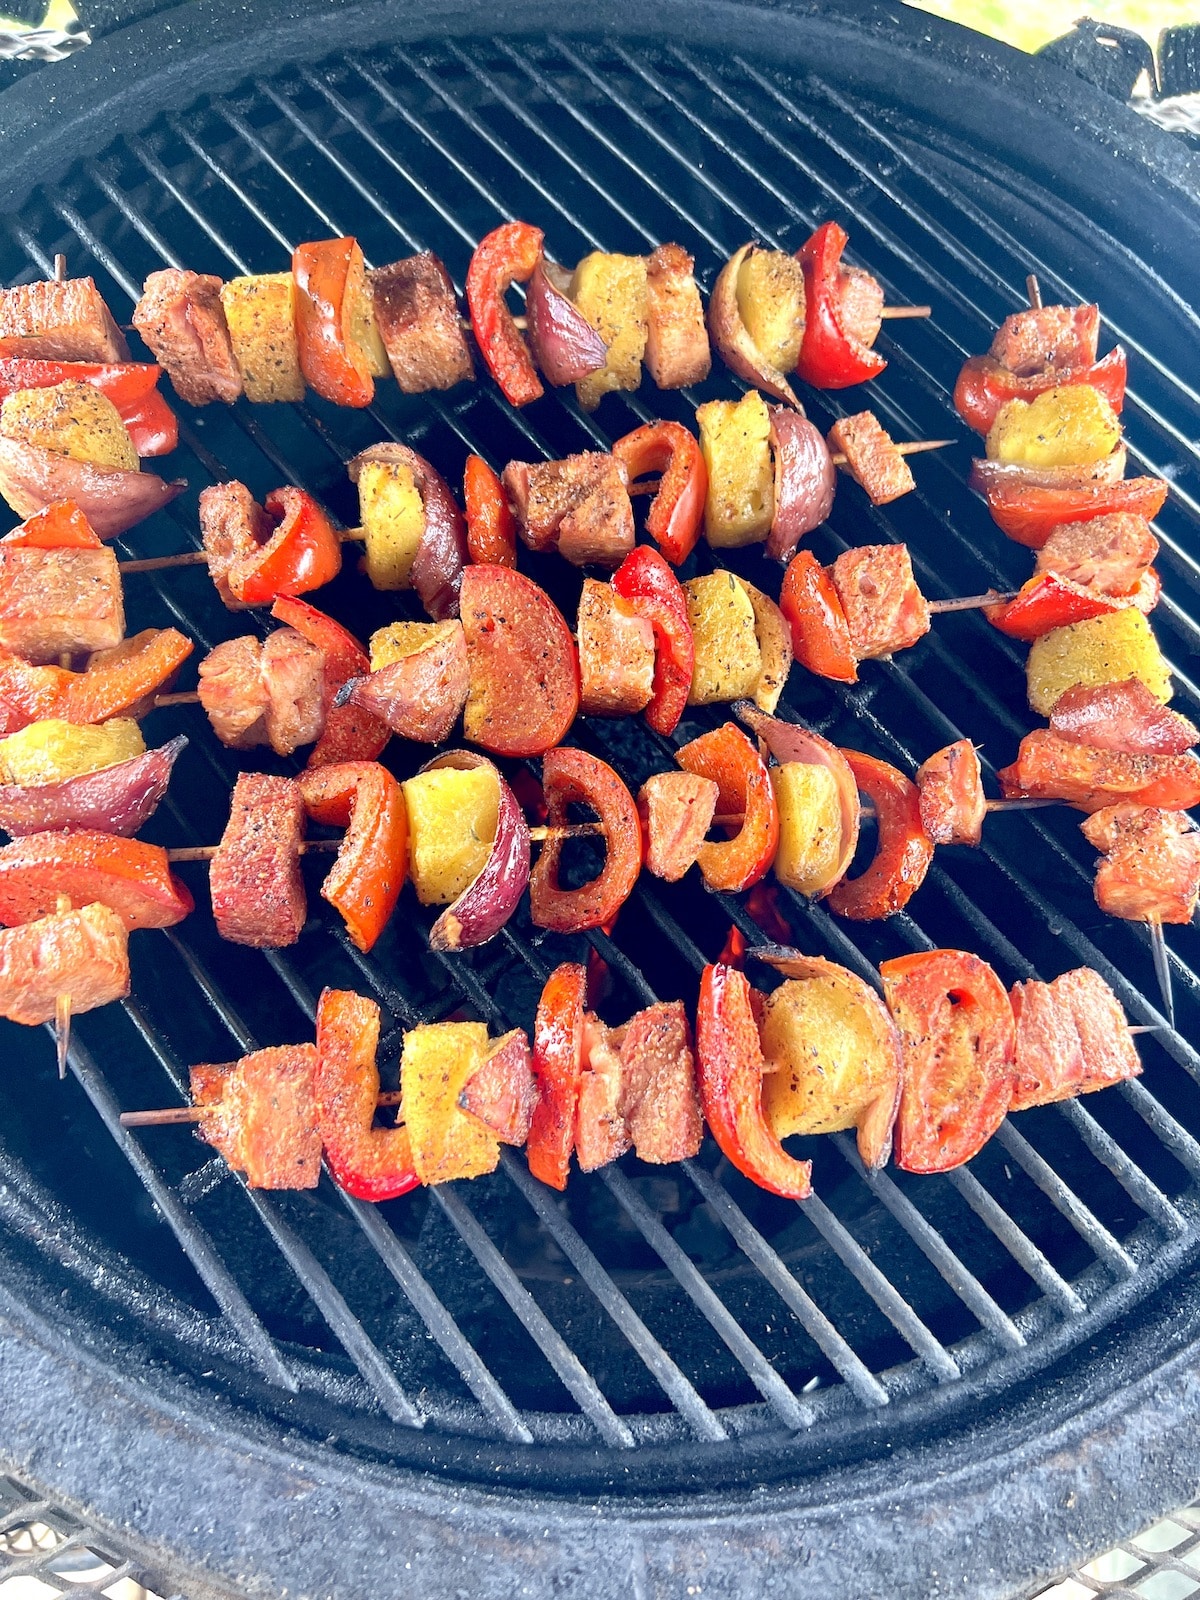 Grilling kabobs with ham, pineapple and vegetables.